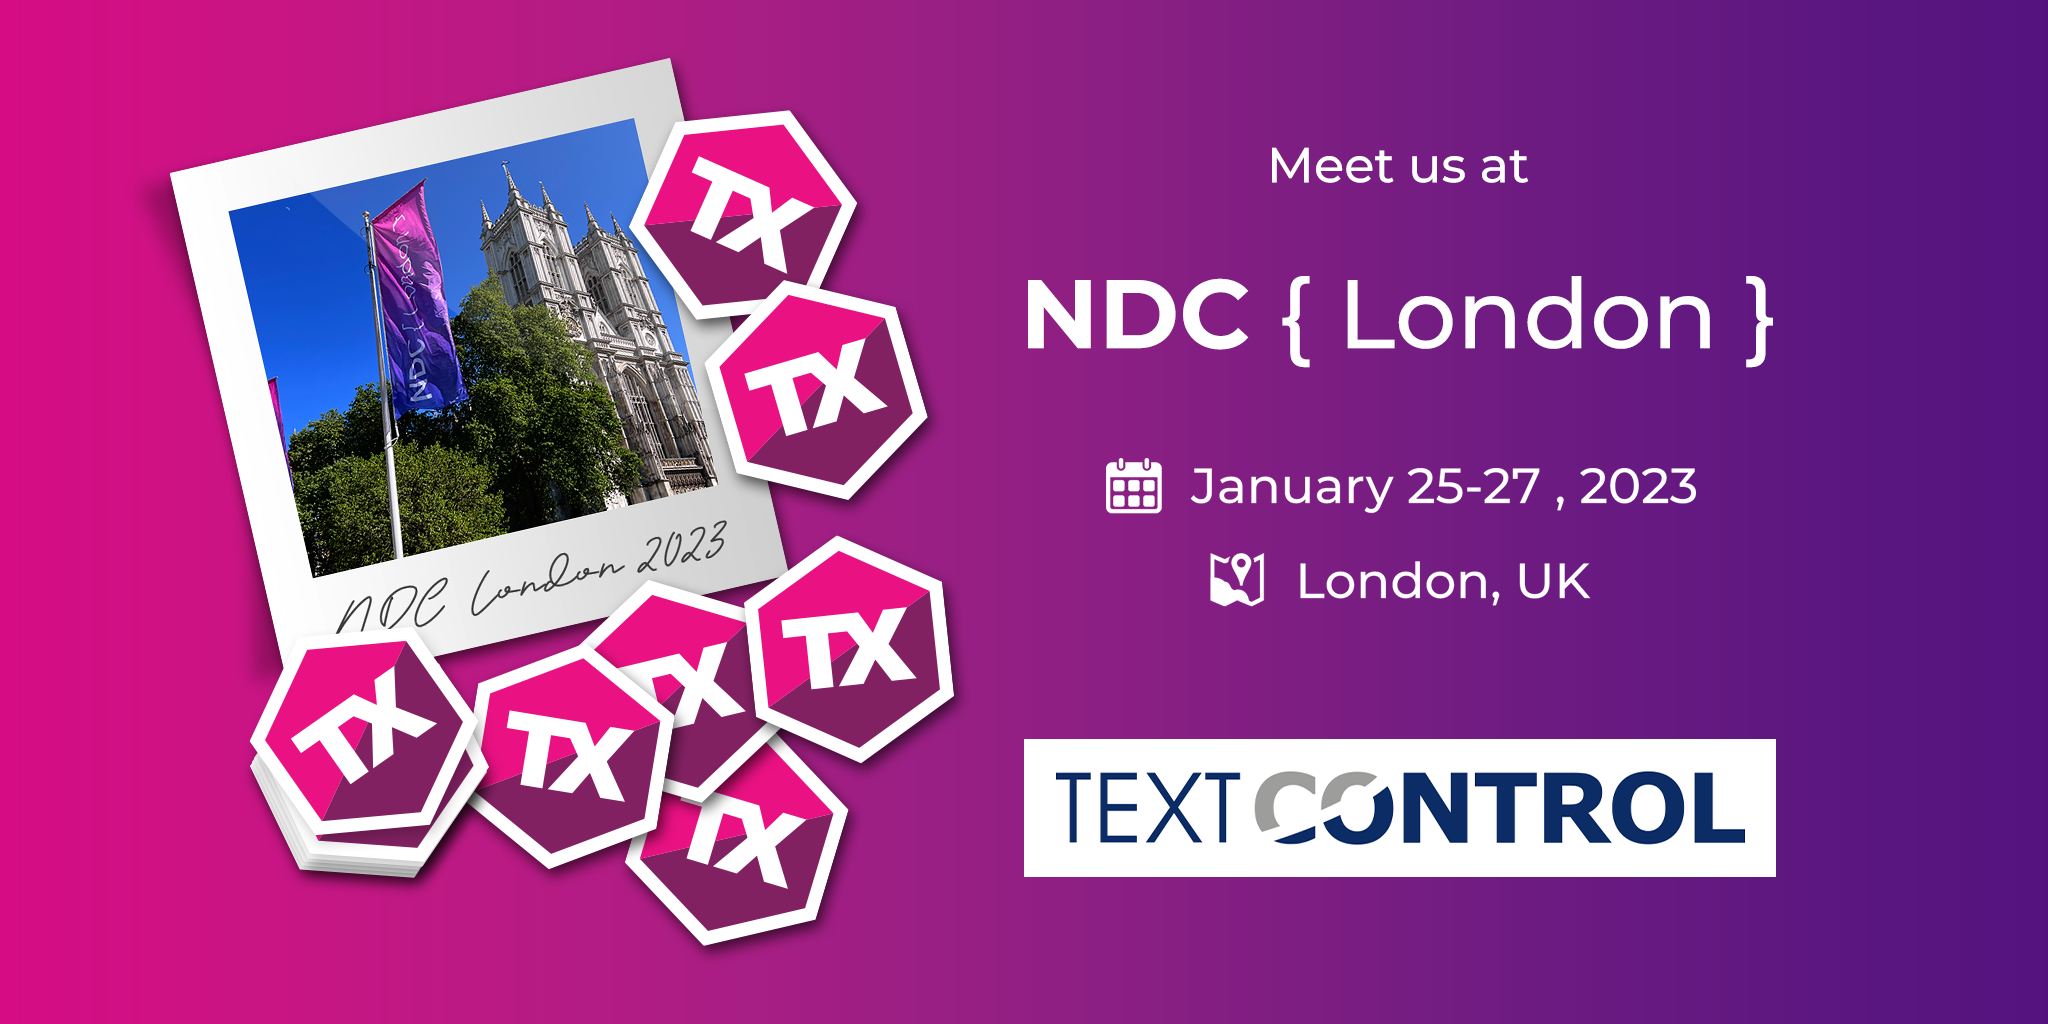 Text Control at NDC London 2023